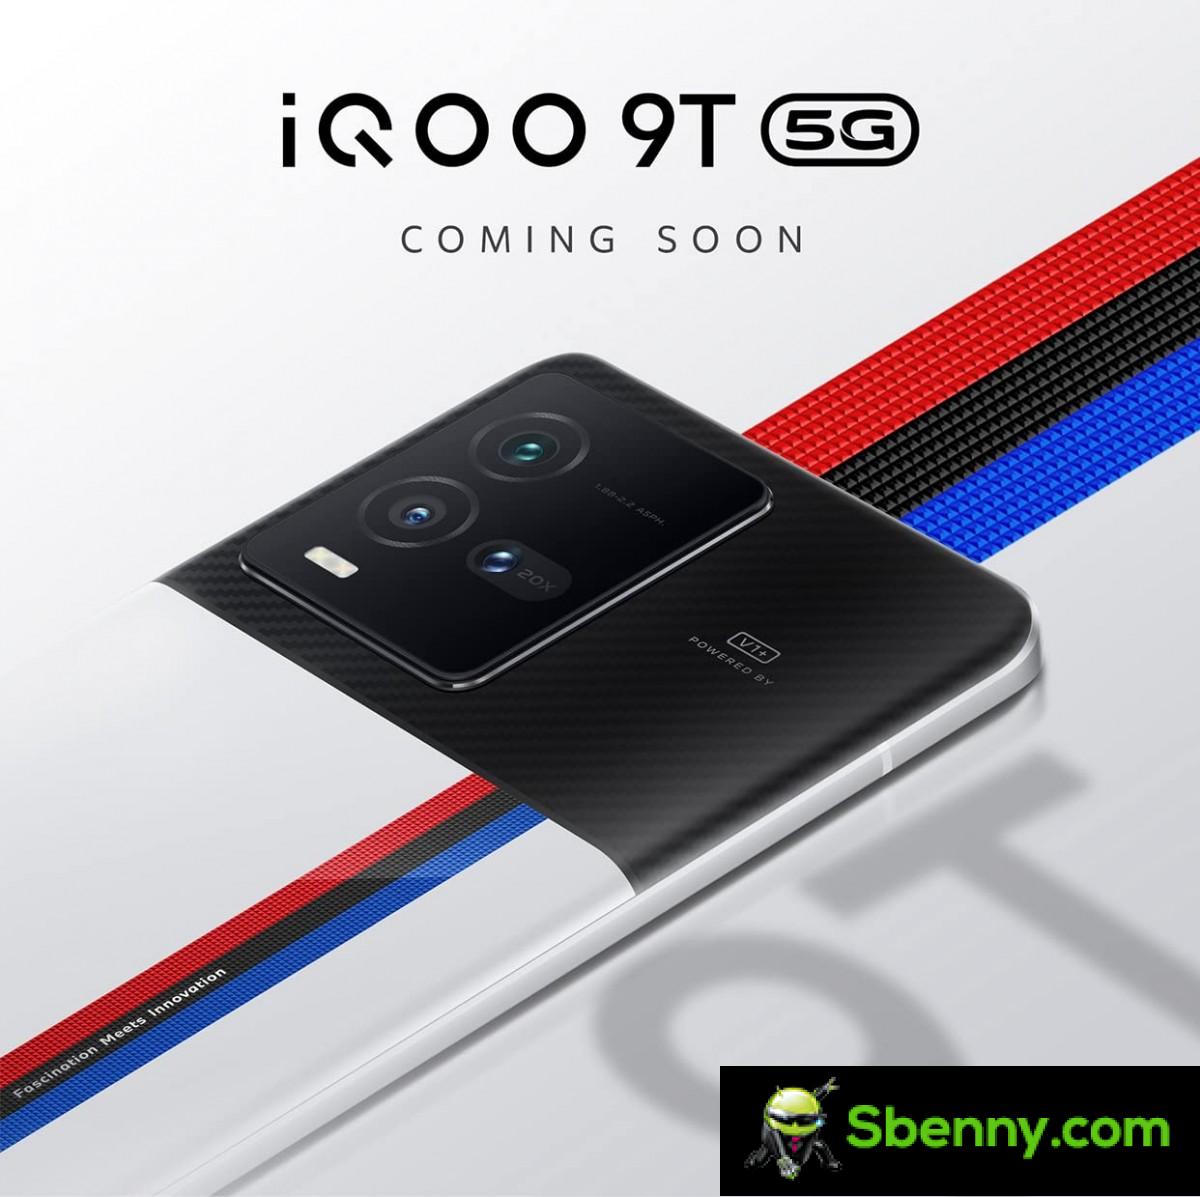 The design of the iQOO 9T revealed in the official image